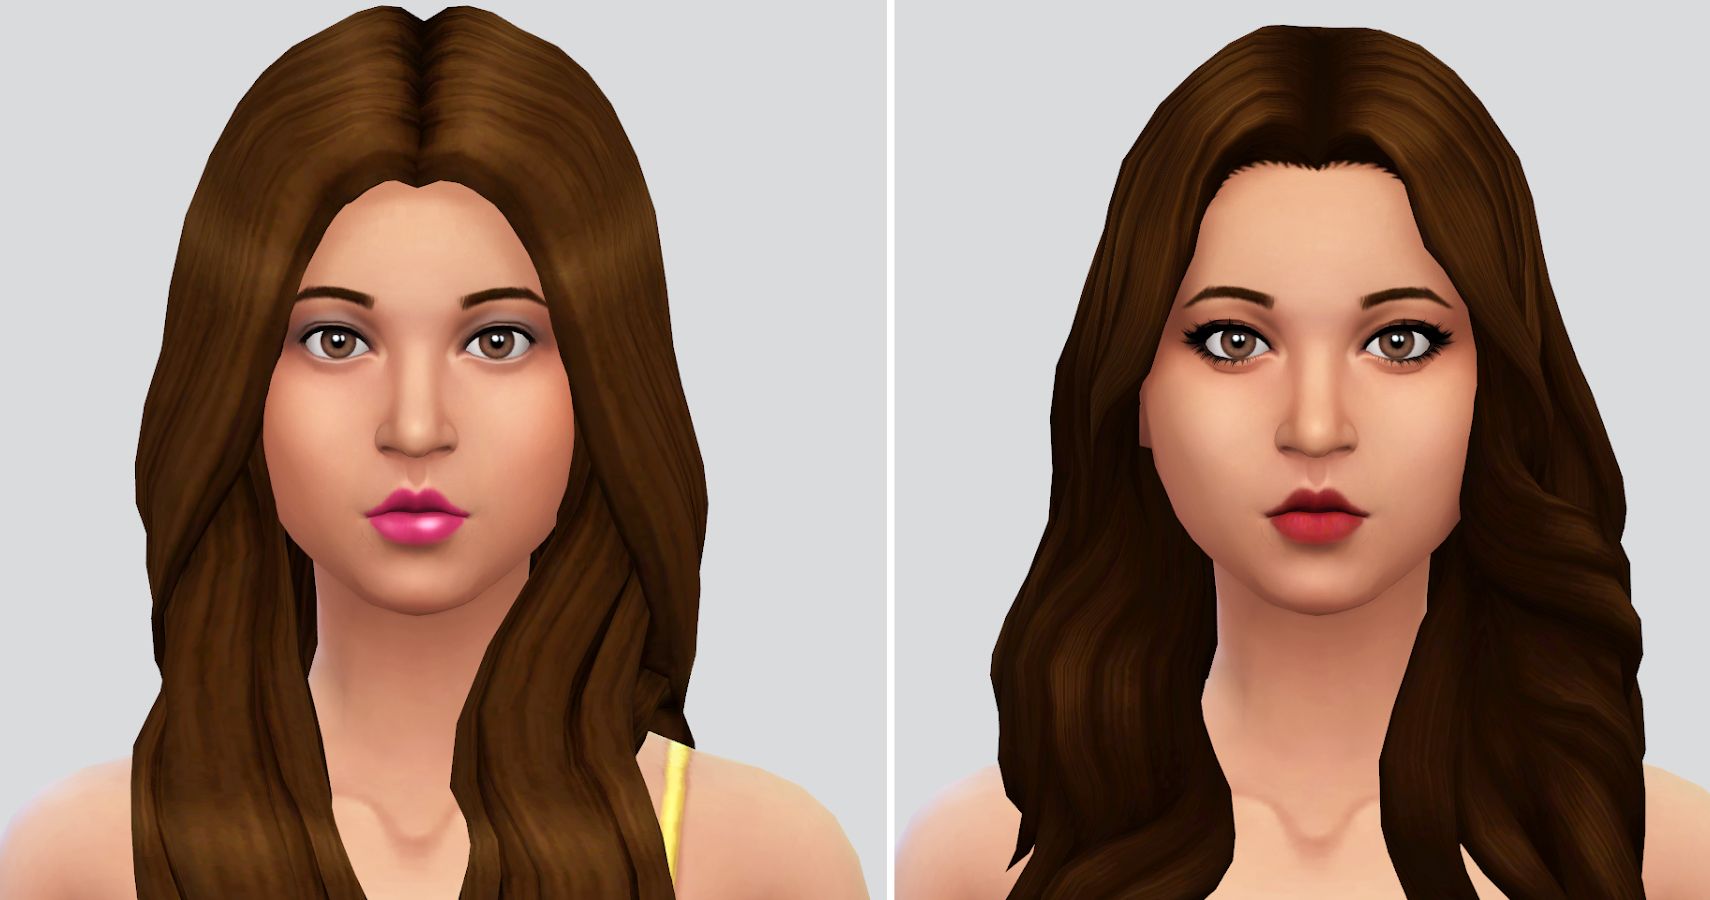 sims 4 with the realistic hair